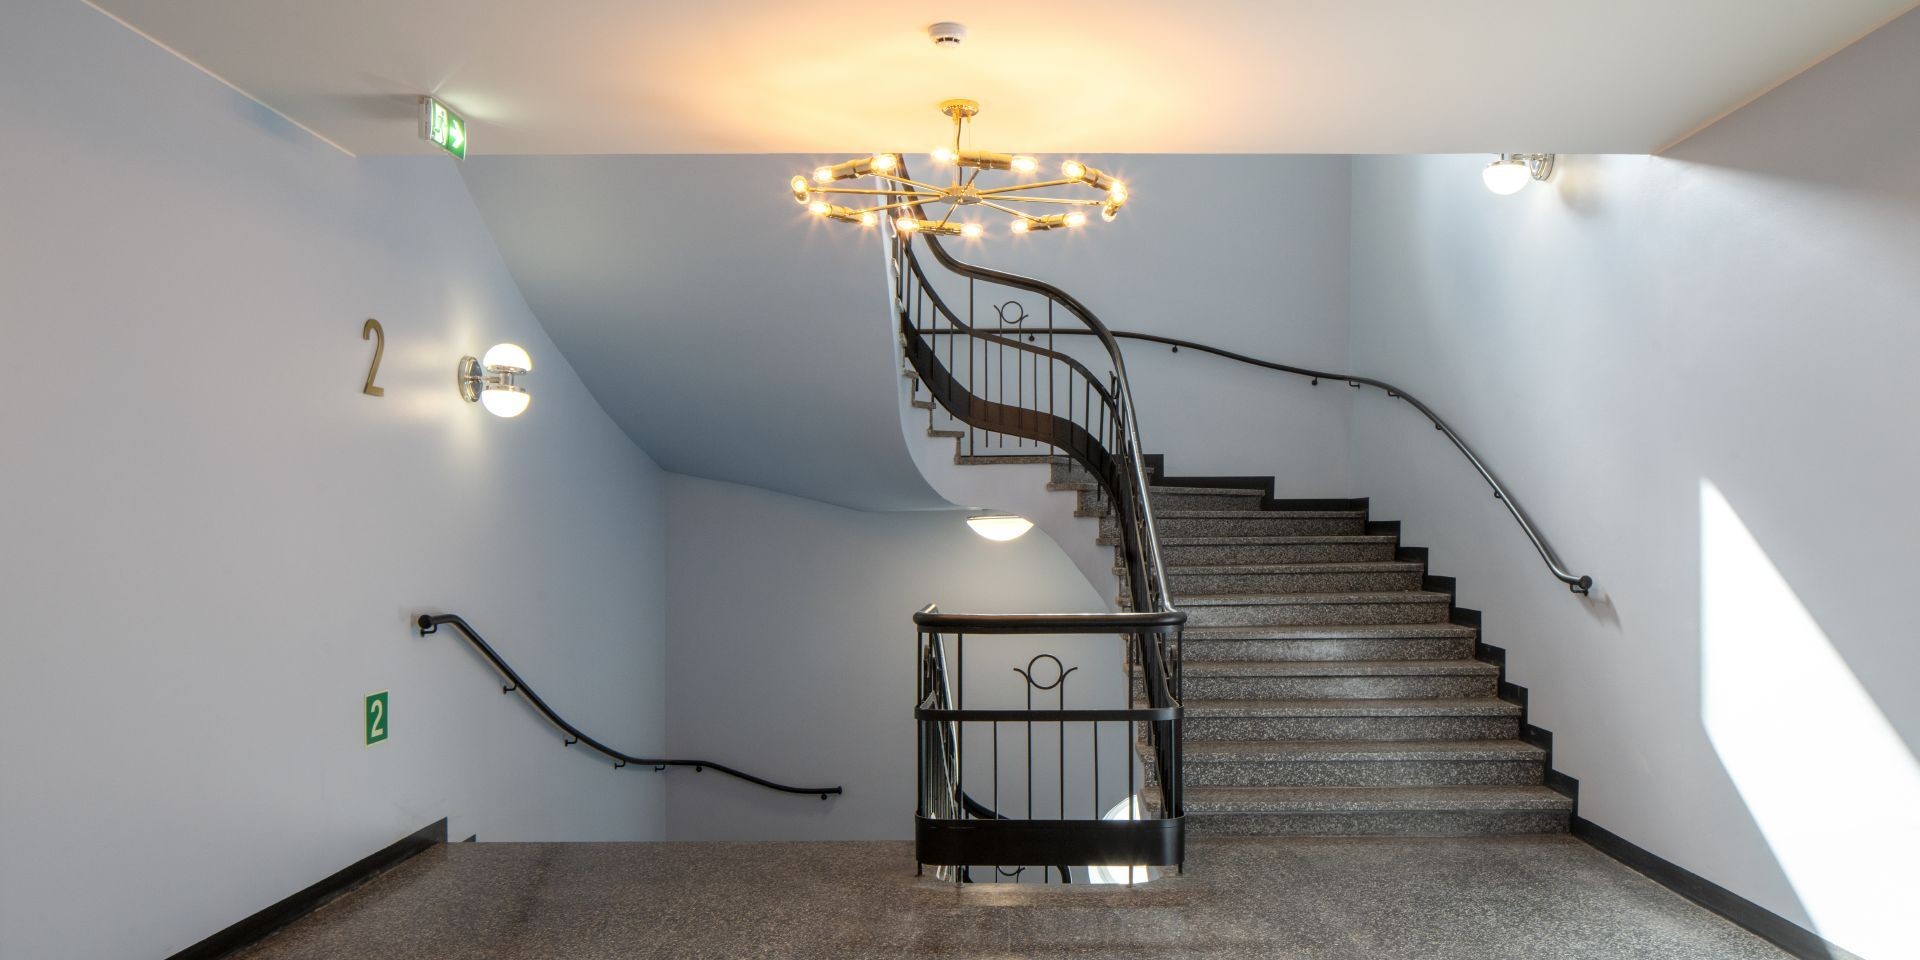 Staircase painted with light blue shade 